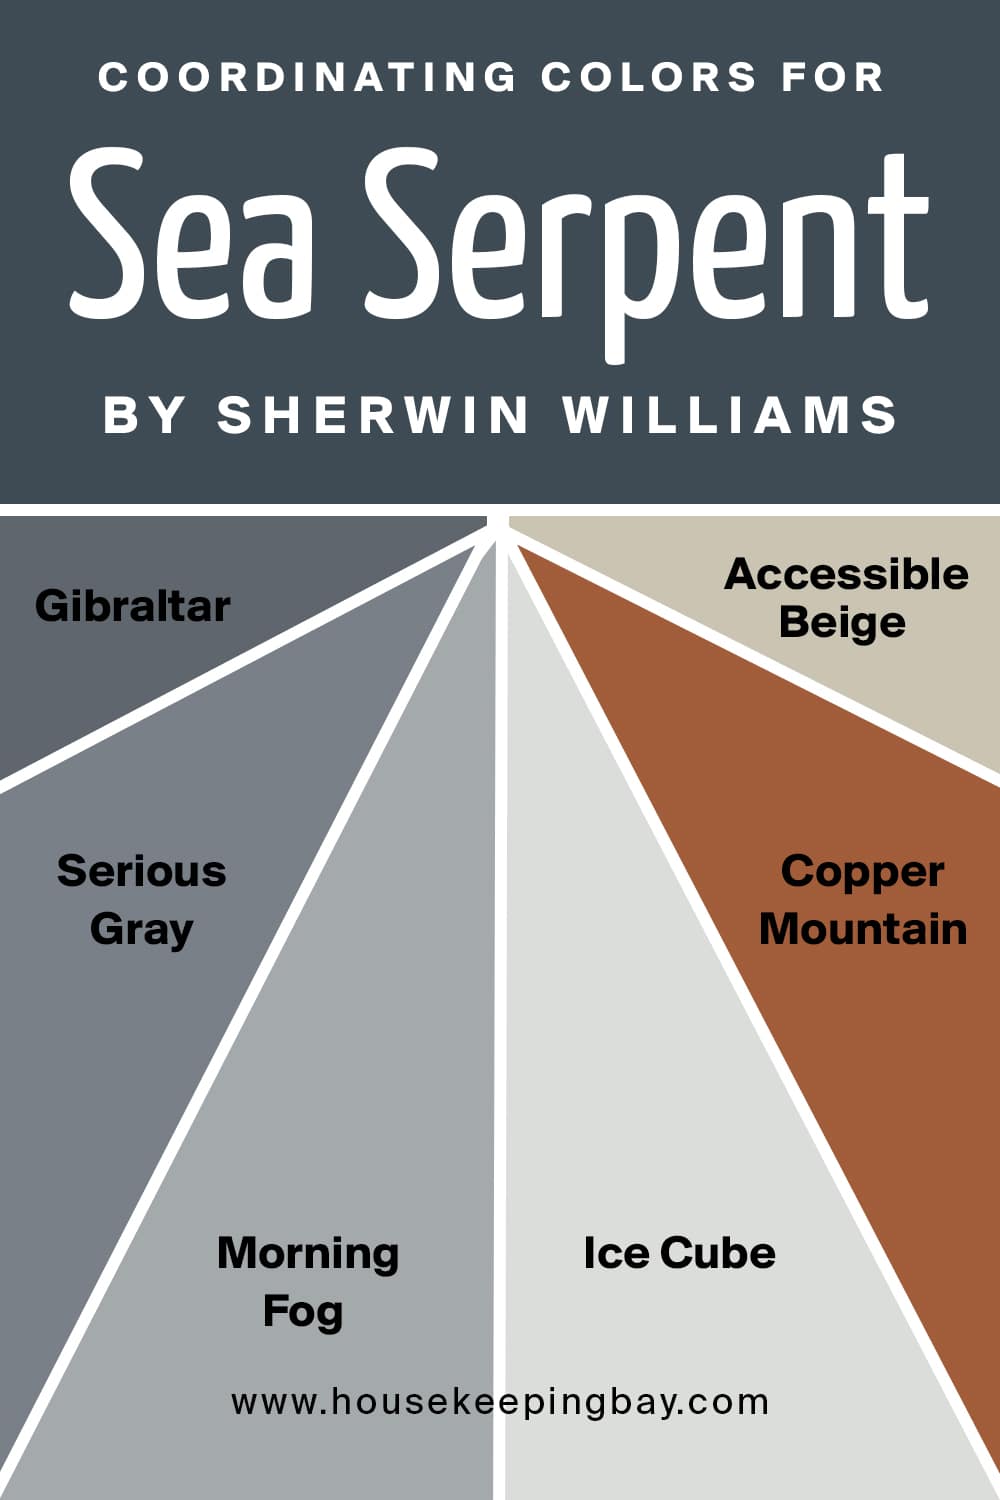 Coordinating Colors for Sea Serpent by Sherwin Williams